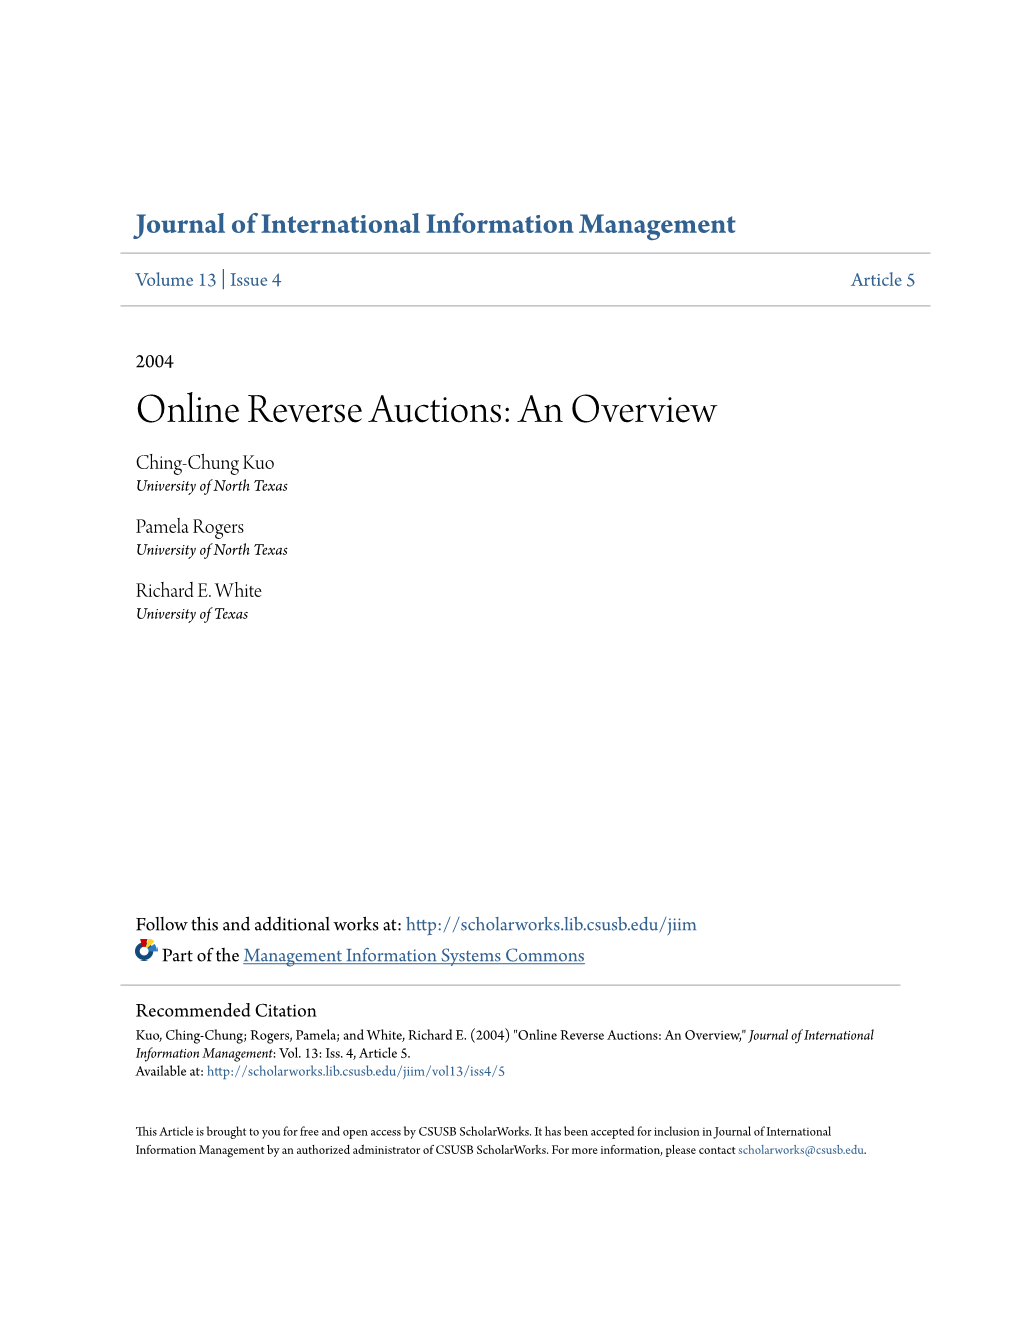 Online Reverse Auctions: an Overview Ching-Chung Kuo University of North Texas